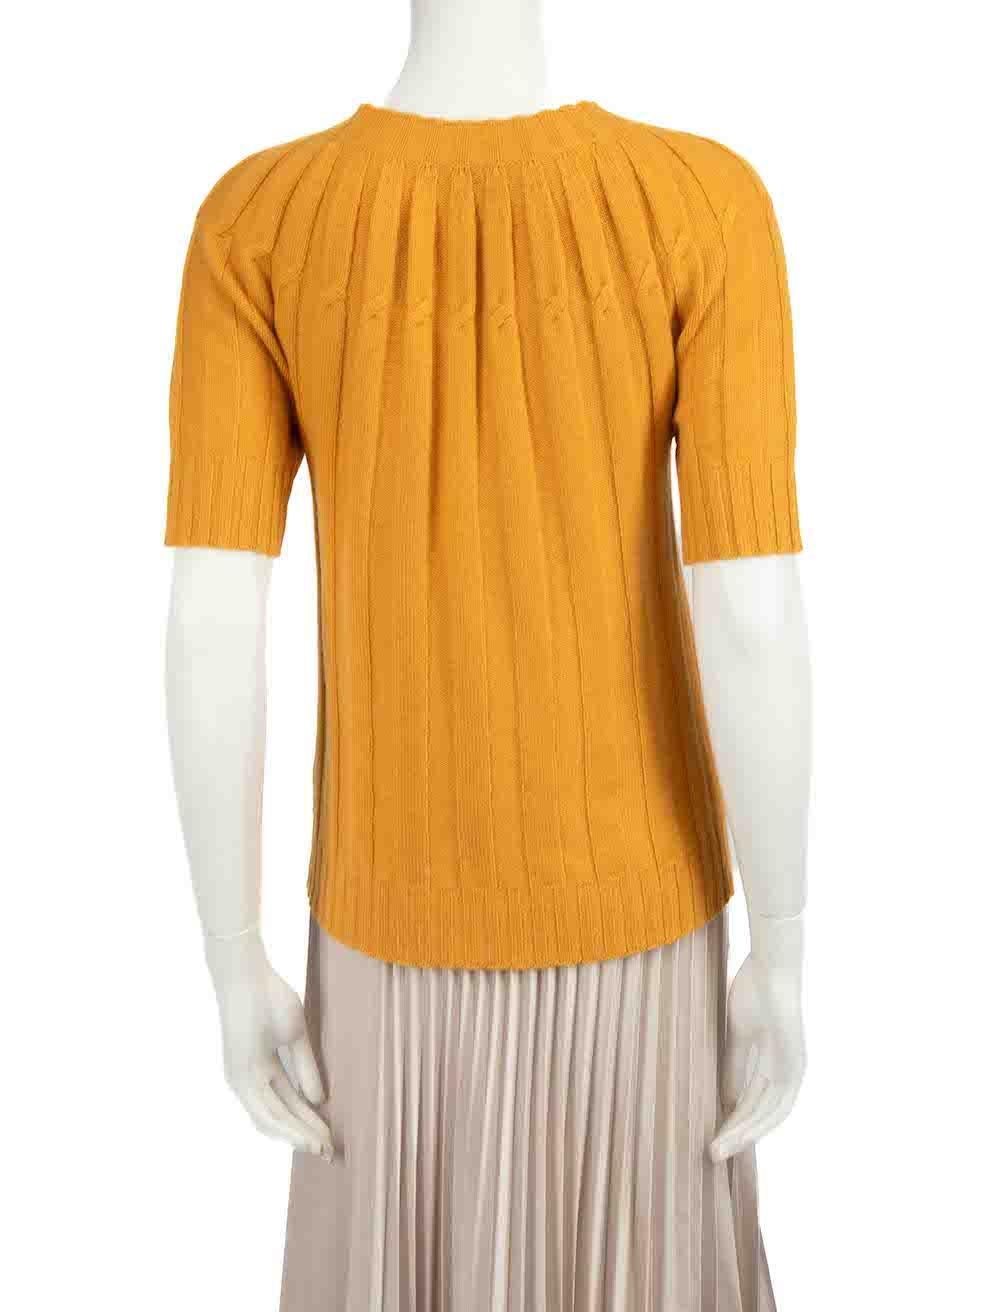 Bottega Veneta Yellow Cashmere Cable Knit Top Size S In Good Condition For Sale In London, GB